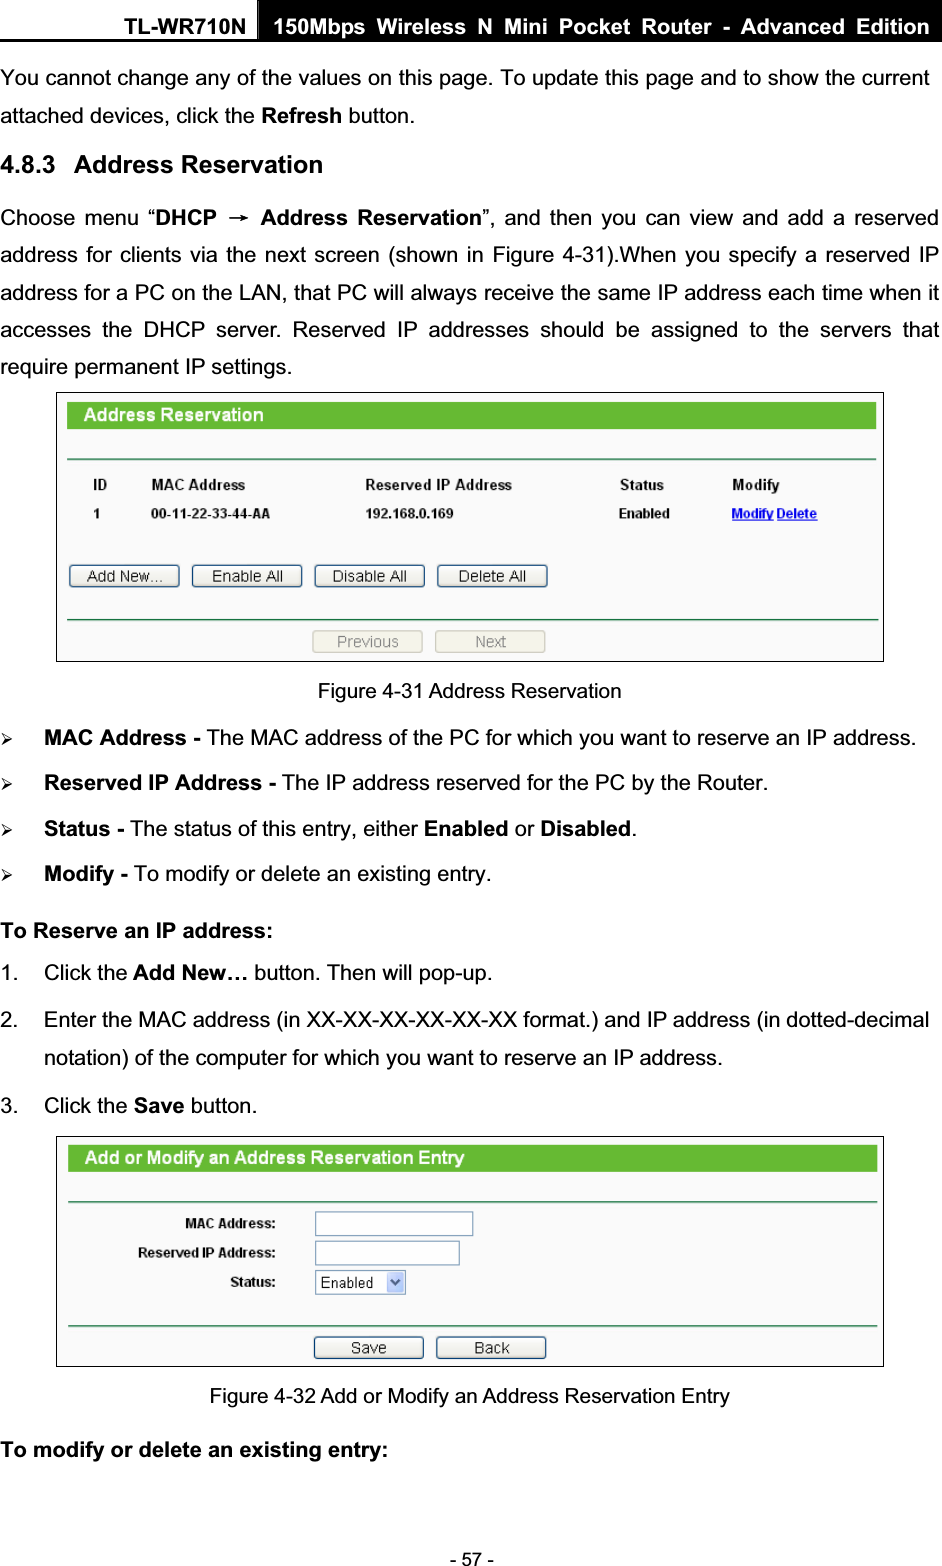 TL-WR710N  150Mbps Wireless N Mini Pocket Router - Advanced Edition- 57 - You cannot change any of the values on this page. To update this page and to show the current attached devices, click the Refresh button. 4.8.3 Address Reservation Choose menu “DHCP ė Address Reservation”, and then you can view and add a reserved address for clients via the next screen (shown in Figure 4-31).When you specify a reserved IP address for a PC on the LAN, that PC will always receive the same IP address each time when it accesses the DHCP server. Reserved IP addresses should be assigned to the servers that require permanent IP settings.   Figure 4-31 Address Reservation ¾MAC Address - The MAC address of the PC for which you want to reserve an IP address. ¾Reserved IP Address - The IP address reserved for the PC by the Router. ¾Status - The status of this entry, either Enabled or Disabled.¾Modify - To modify or delete an existing entry. To Reserve an IP address:1. Click the Add New… button. Then will pop-up. 2.  Enter the MAC address (in XX-XX-XX-XX-XX-XX format.) and IP address (in dotted-decimal notation) of the computer for which you want to reserve an IP address.   3. Click the Save button.   Figure 4-32 Add or Modify an Address Reservation Entry To modify or delete an existing entry: 